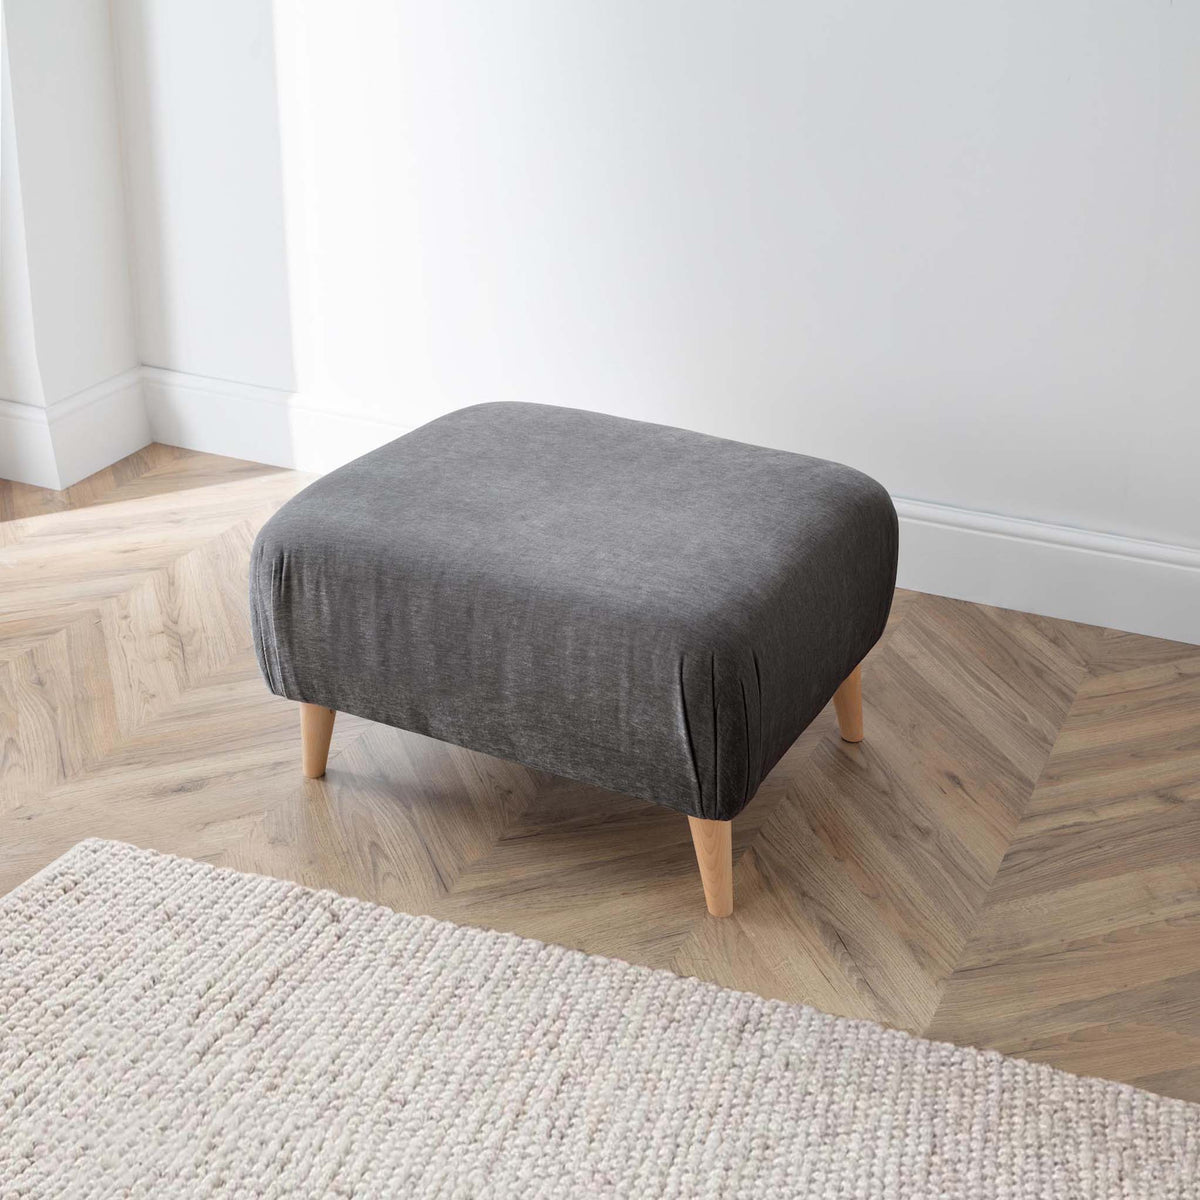 Rowen charcoal grey footstool from roseland